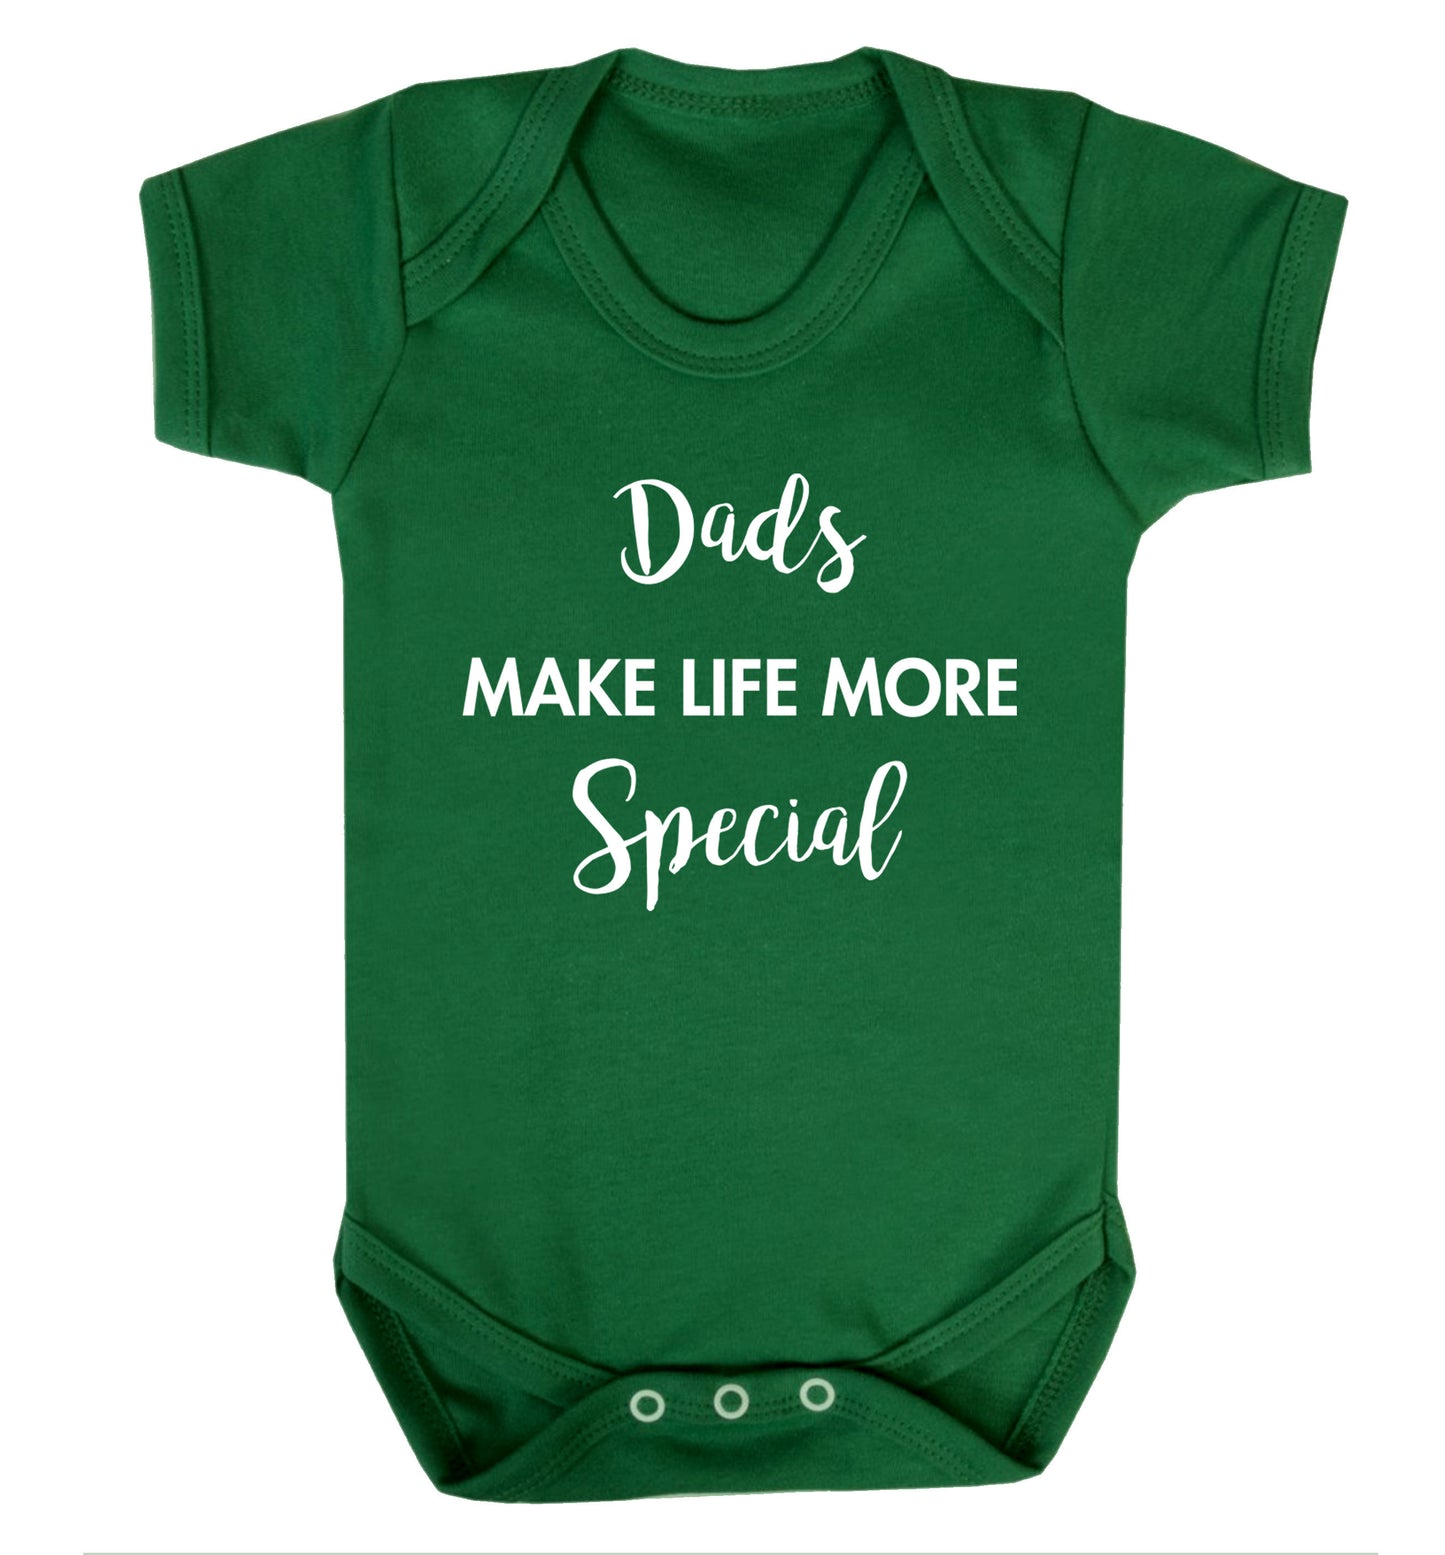 Dads make life more special Baby Vest green 18-24 months